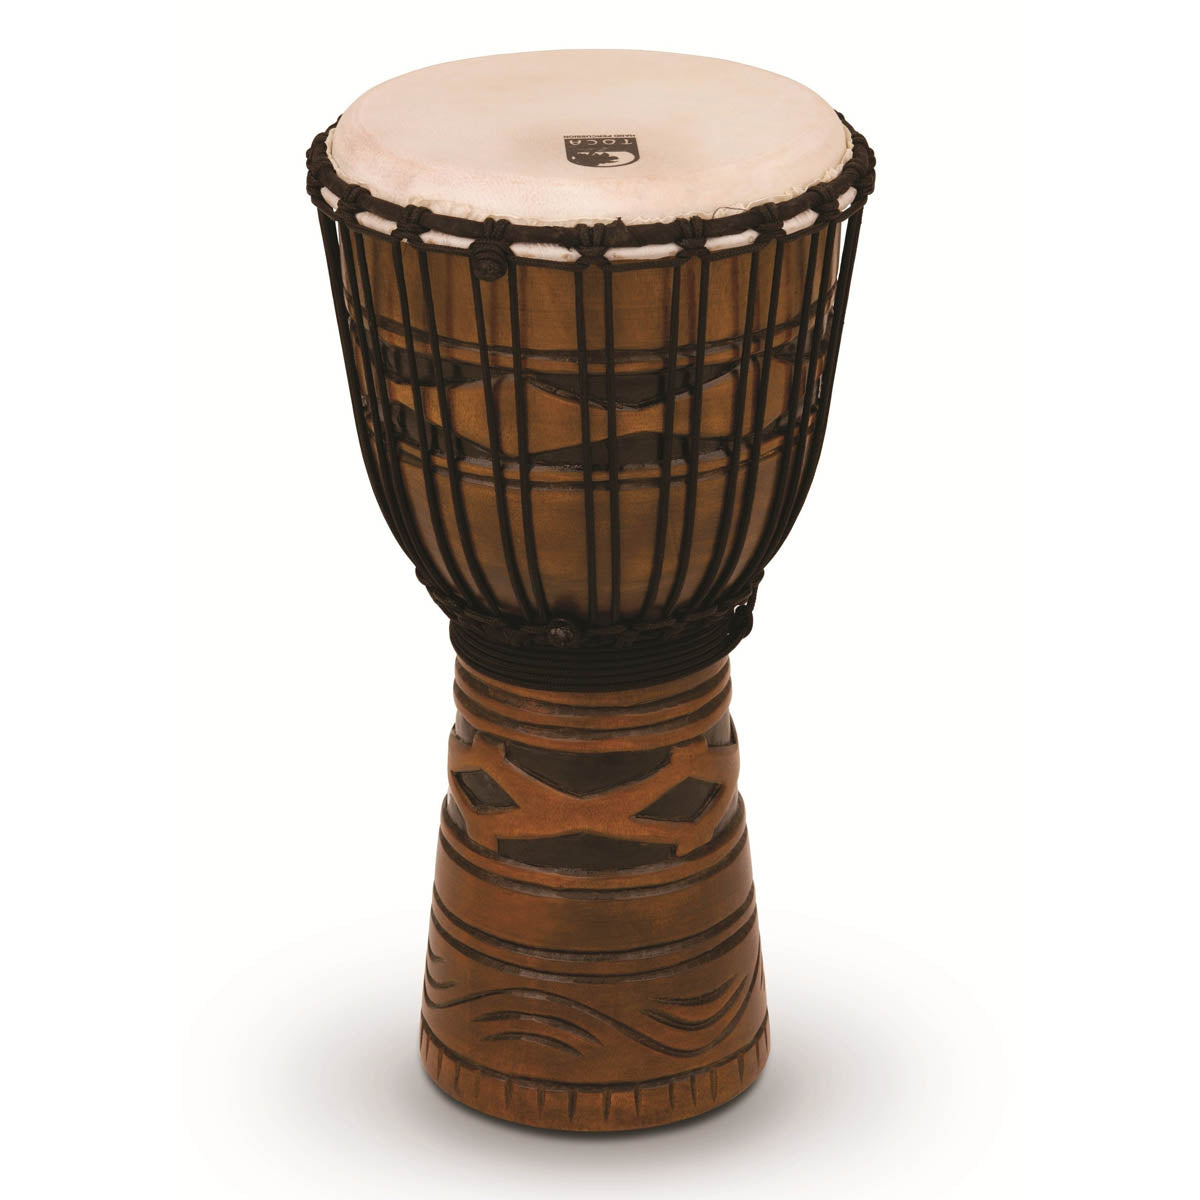 Toca Origins Series 10’’ Rope Tuned Djembe - African Mask